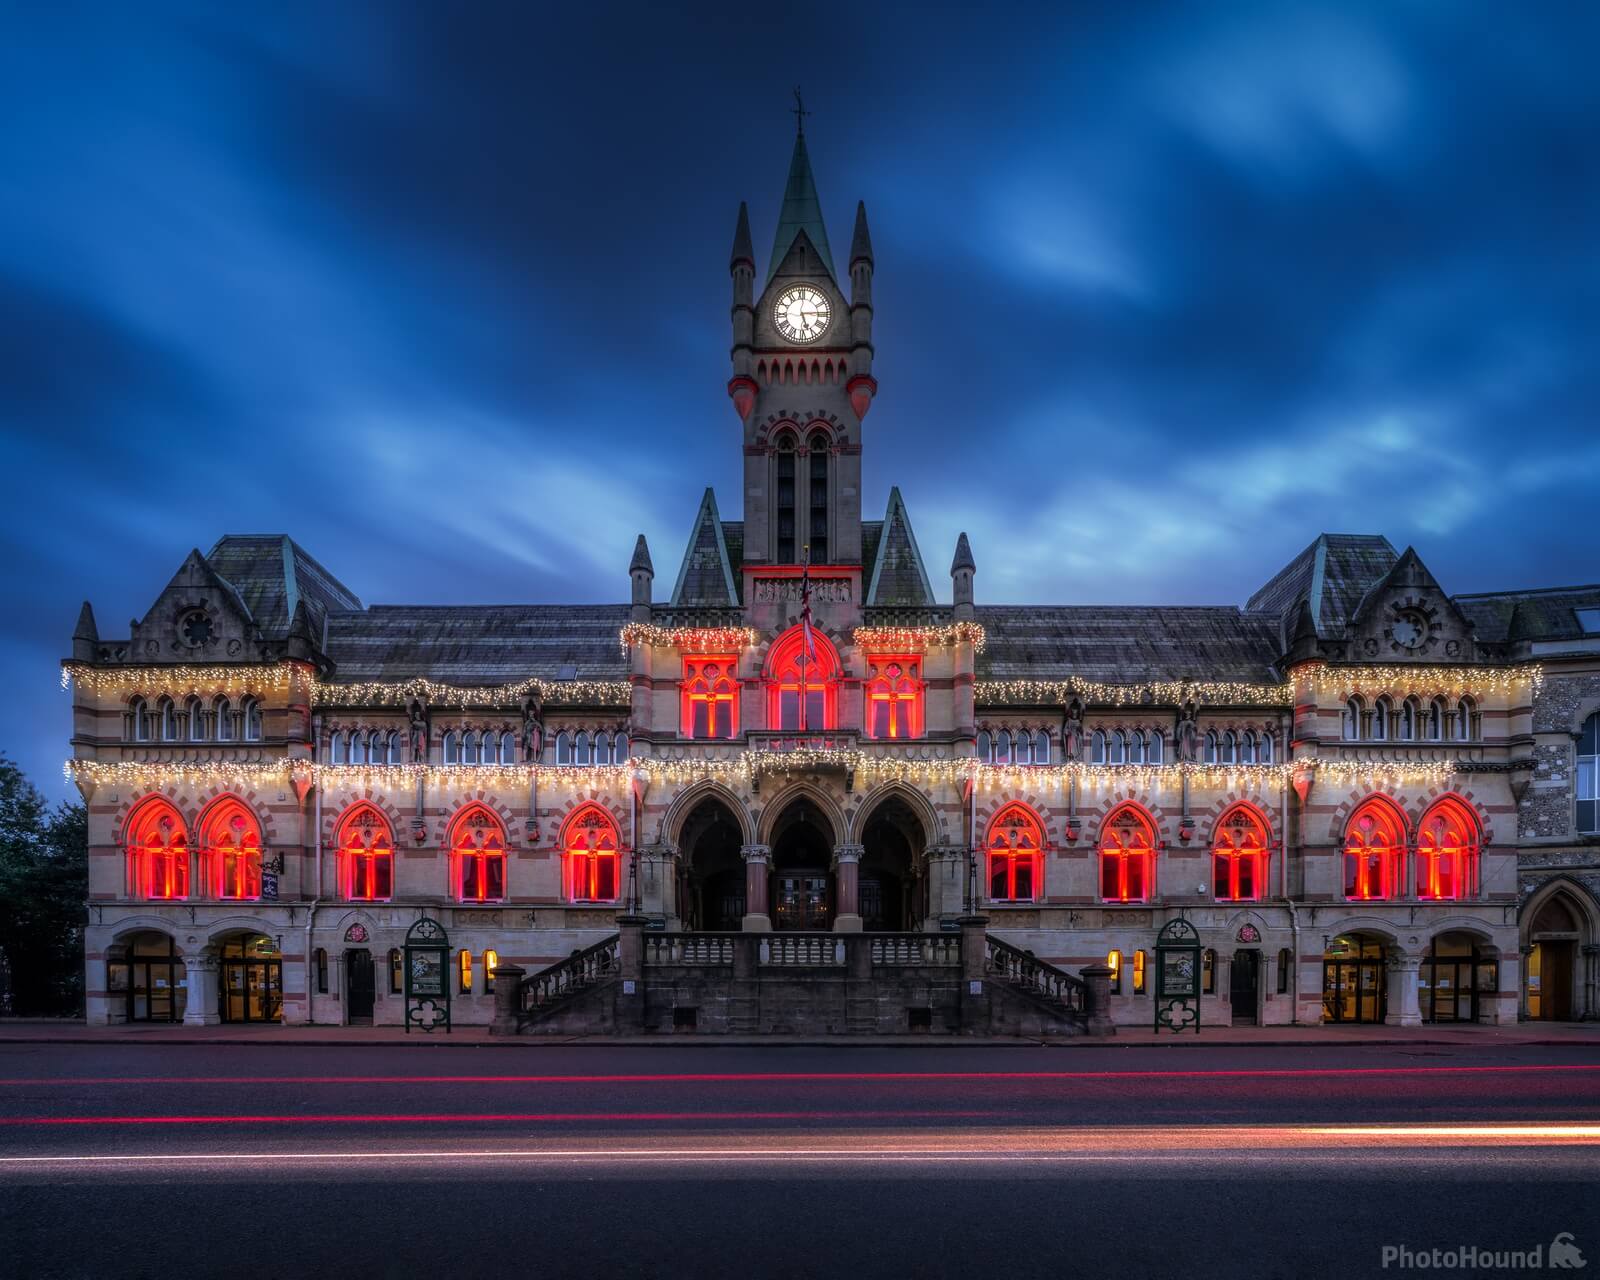 Image of Guildhall Winchester by Jakub Bors